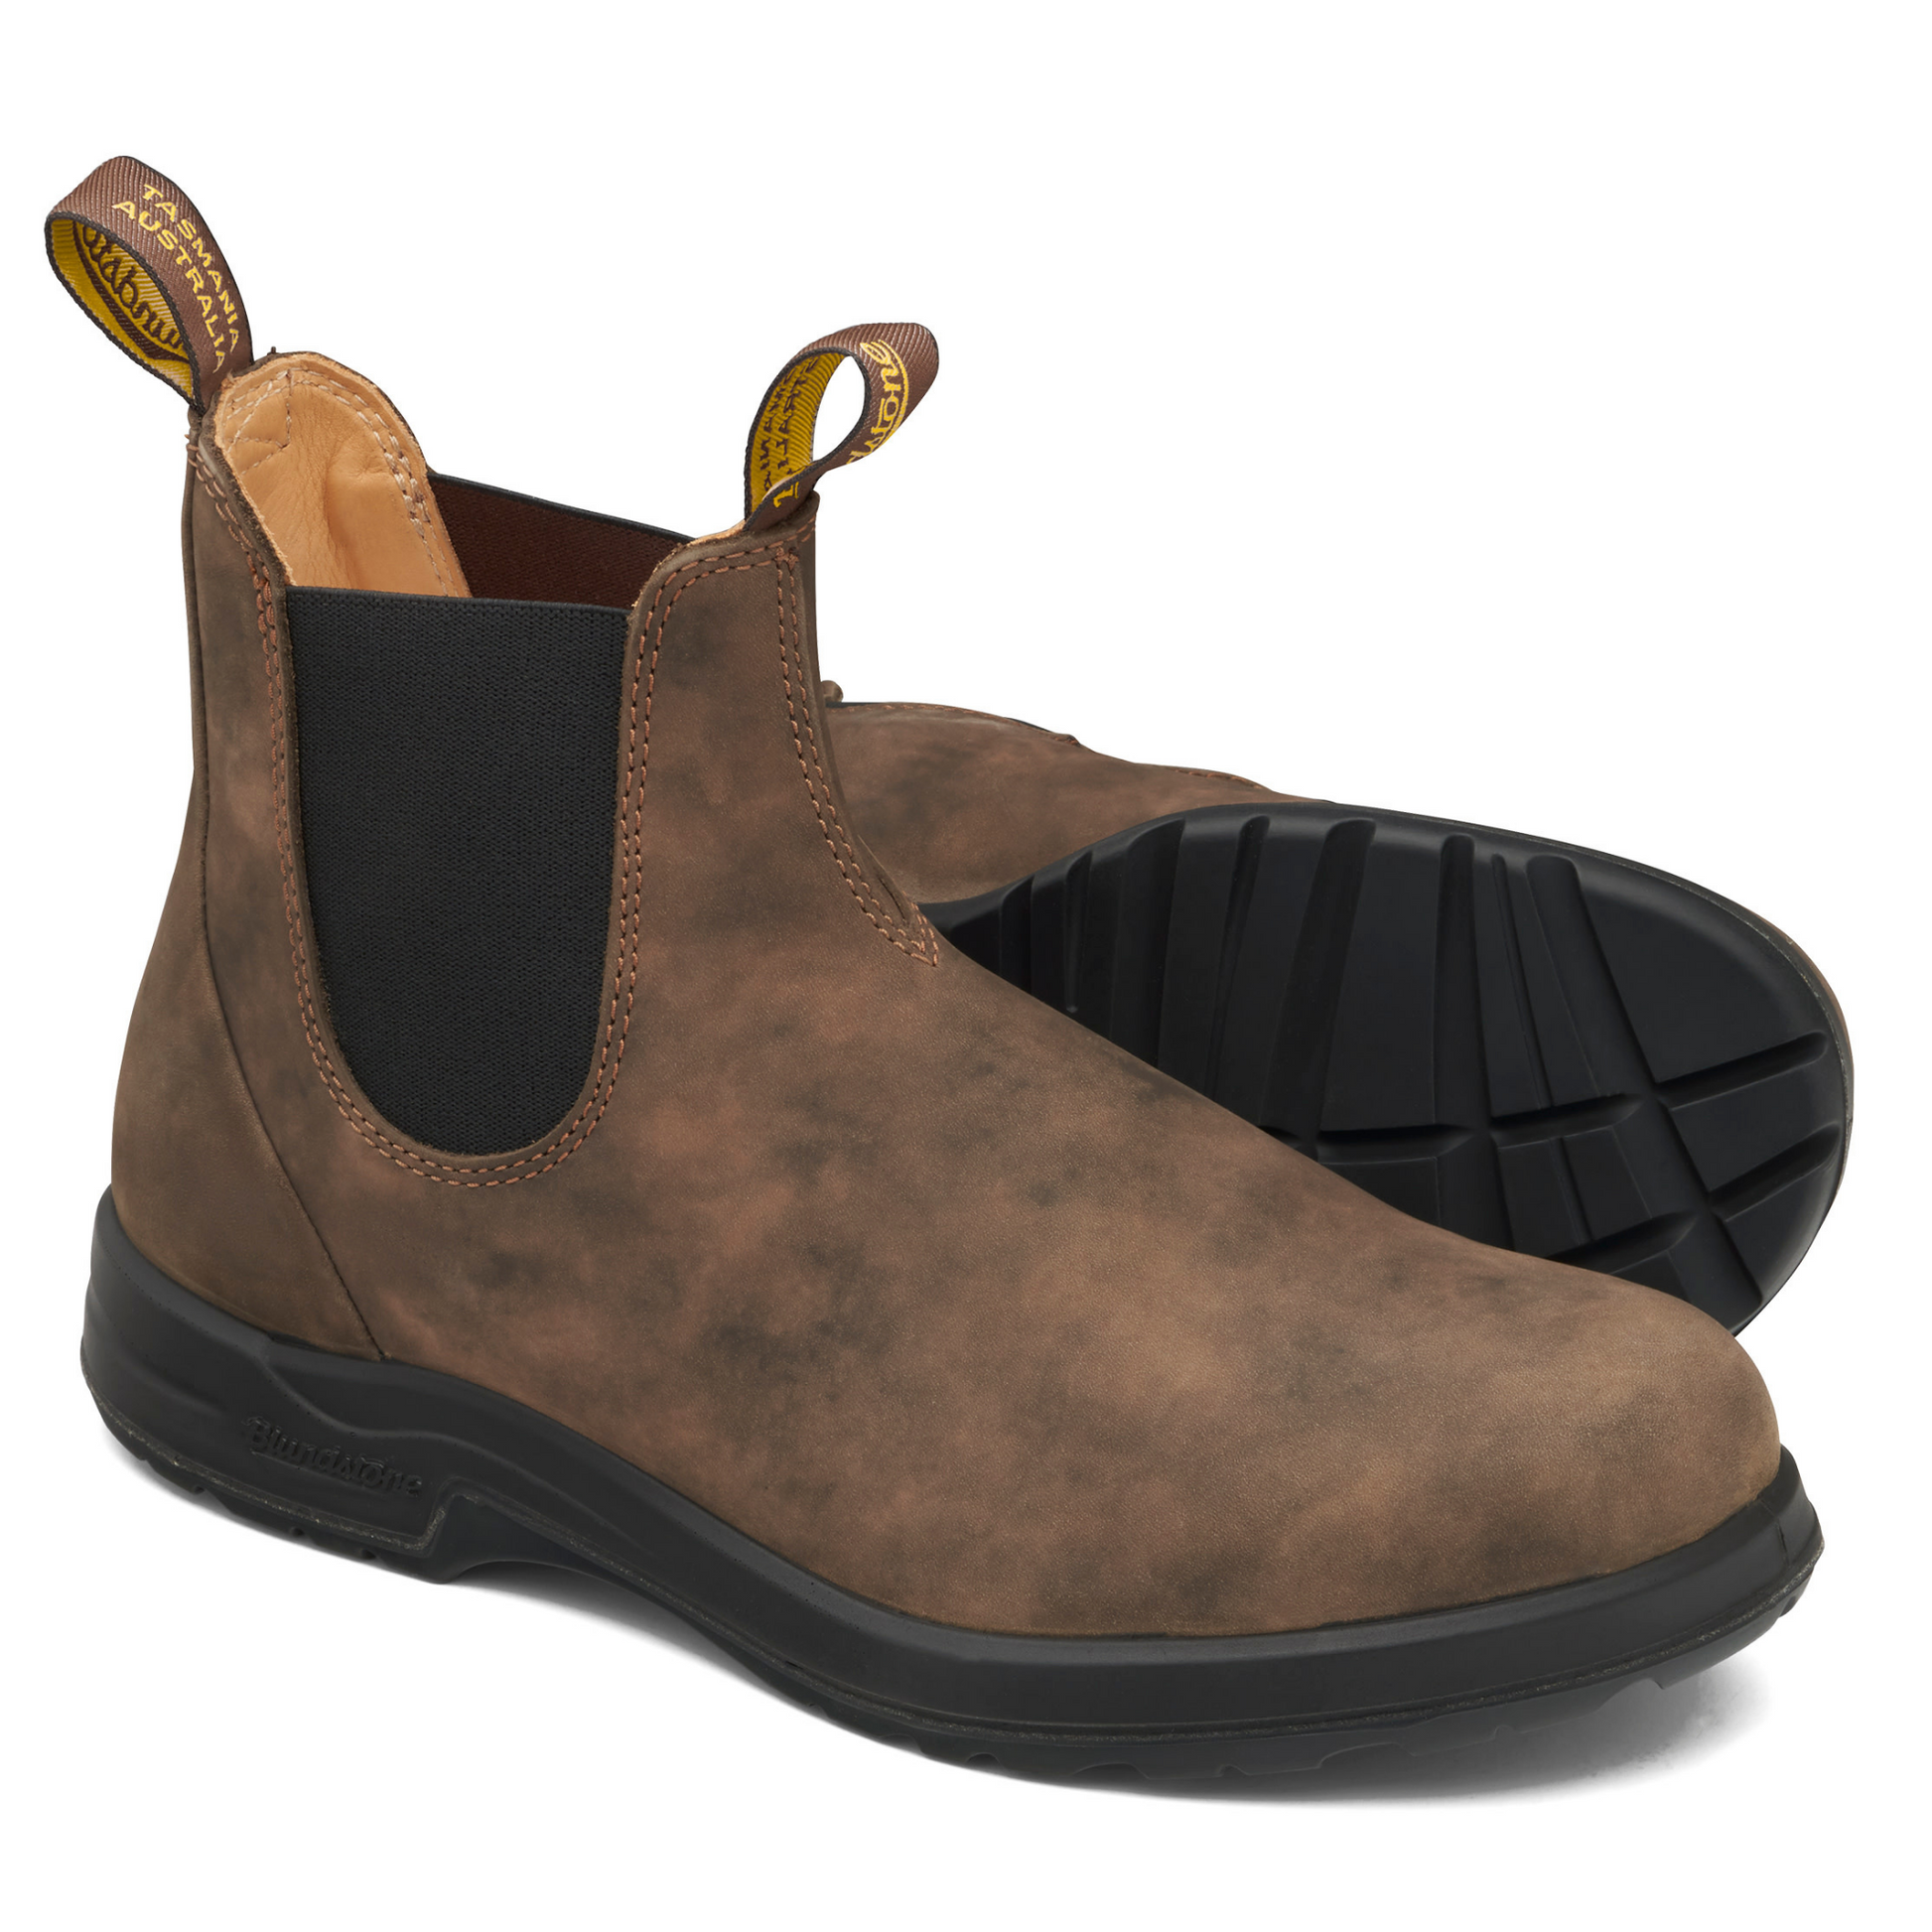 A pair of brown, leather boots with black soles and tan coloured leather interior lining.